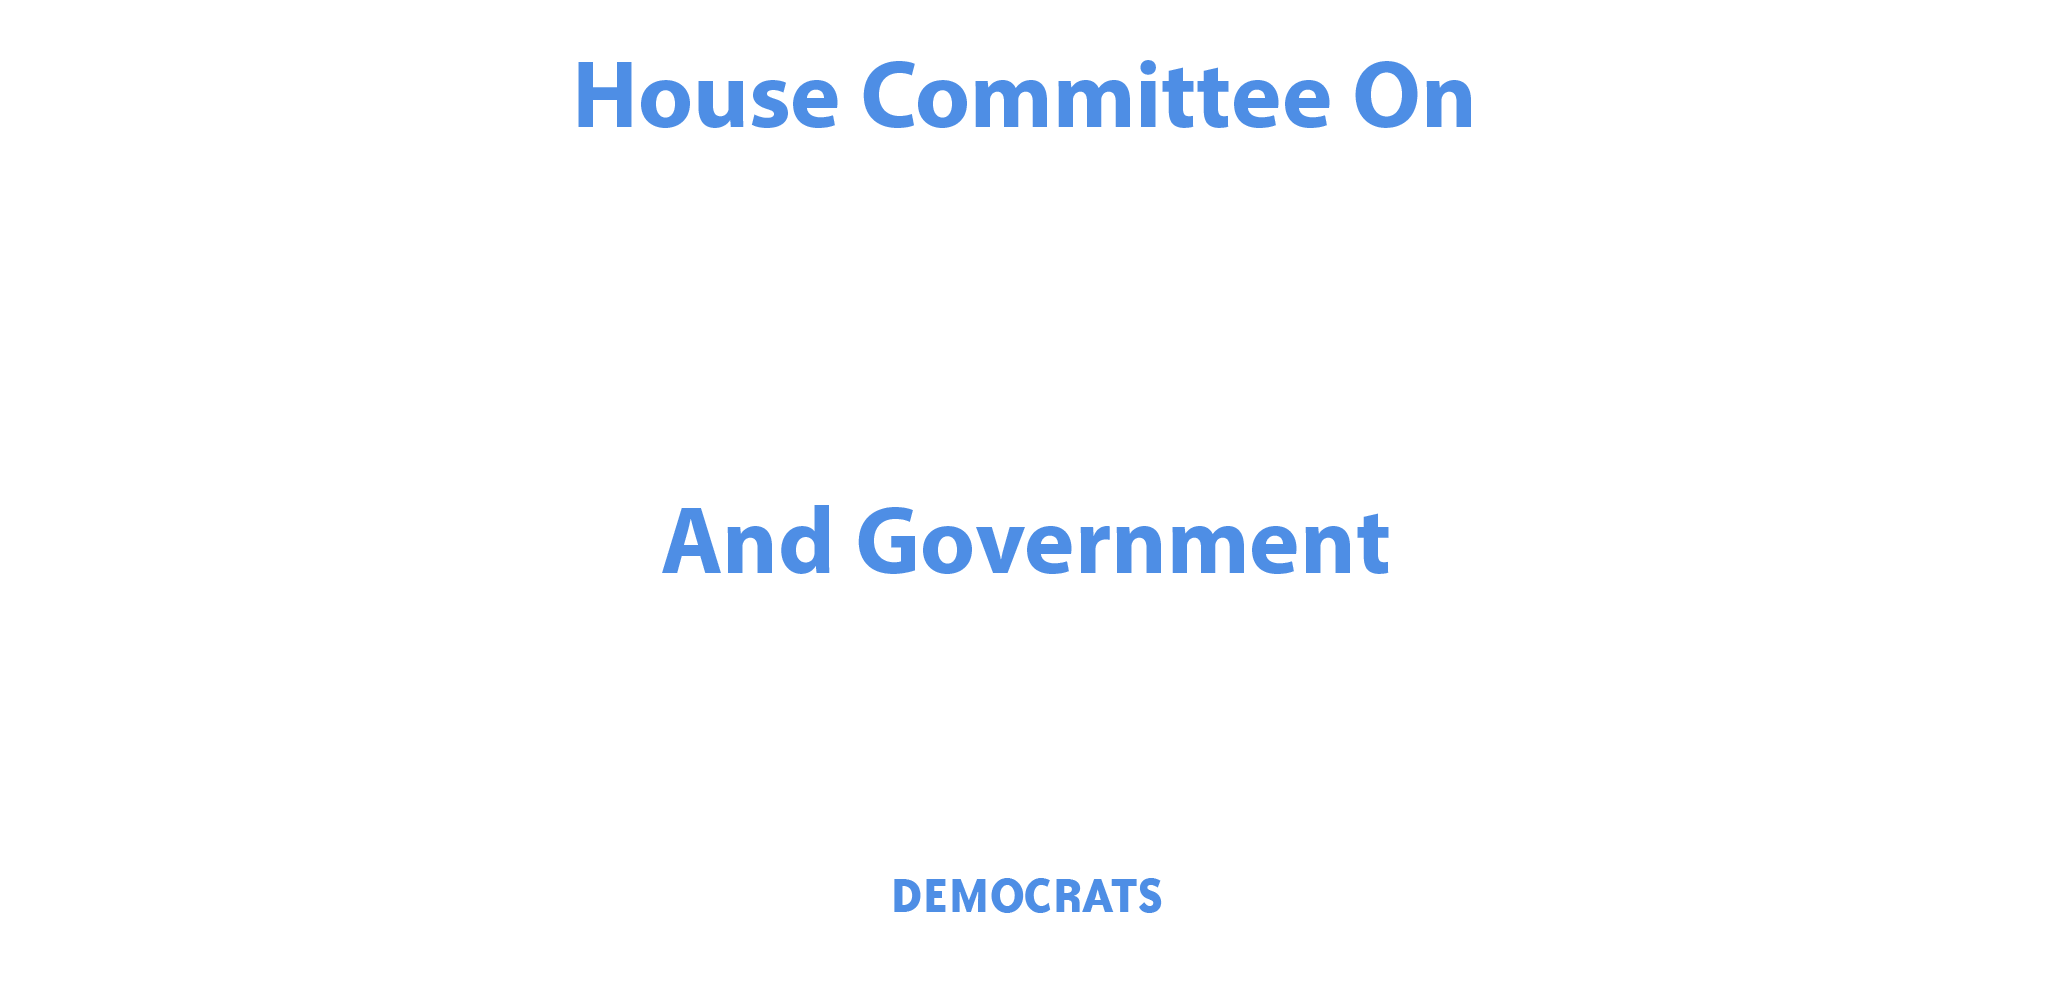 House Committee on Oversight and Government Reform Democrats